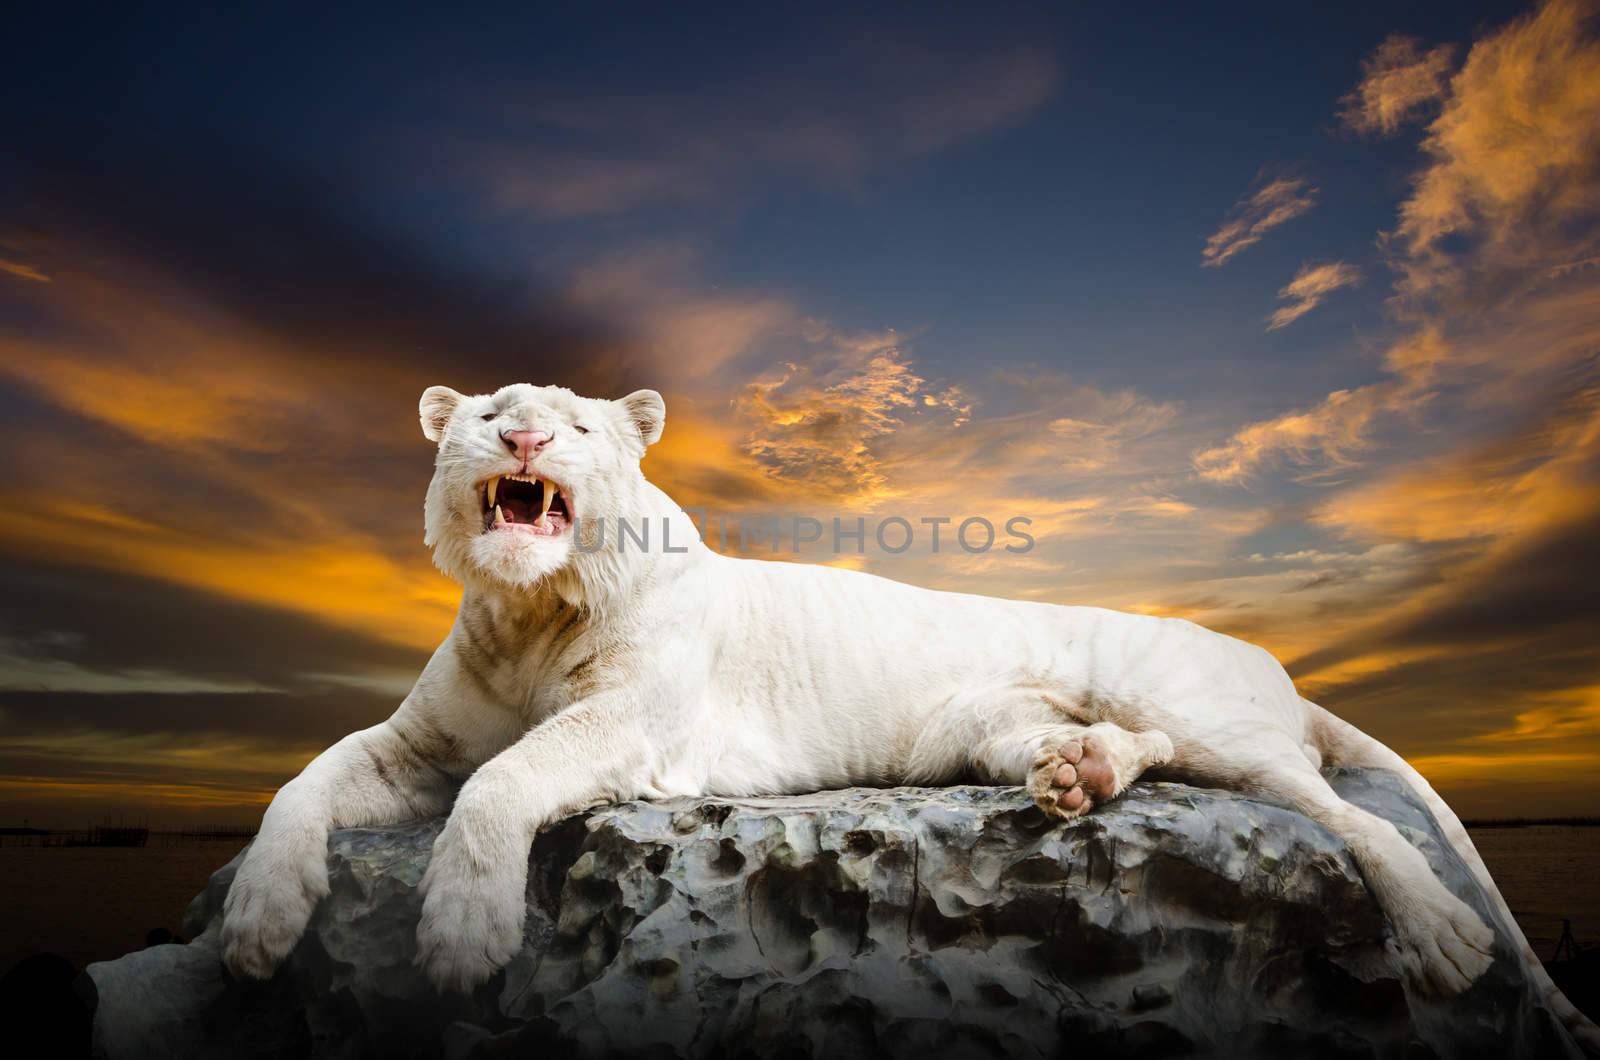 The white Tiger looking something on the rock with beautiful sky at sunset time